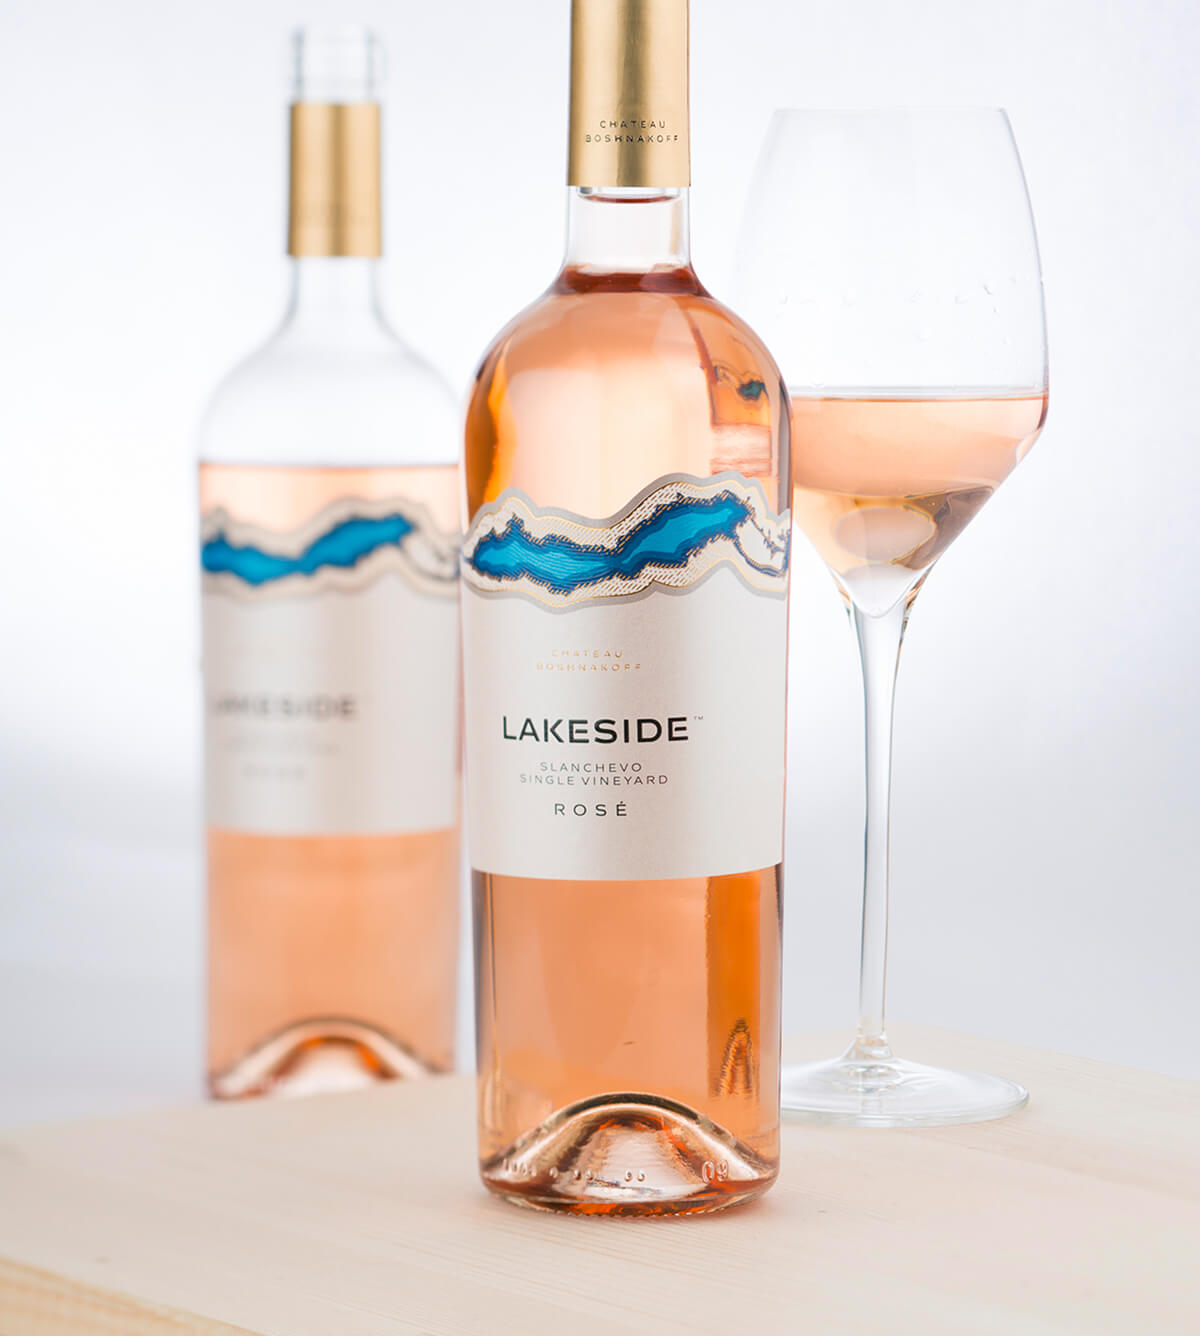 Wine Brand Creation and Wine Label Design for Lakeside Wines